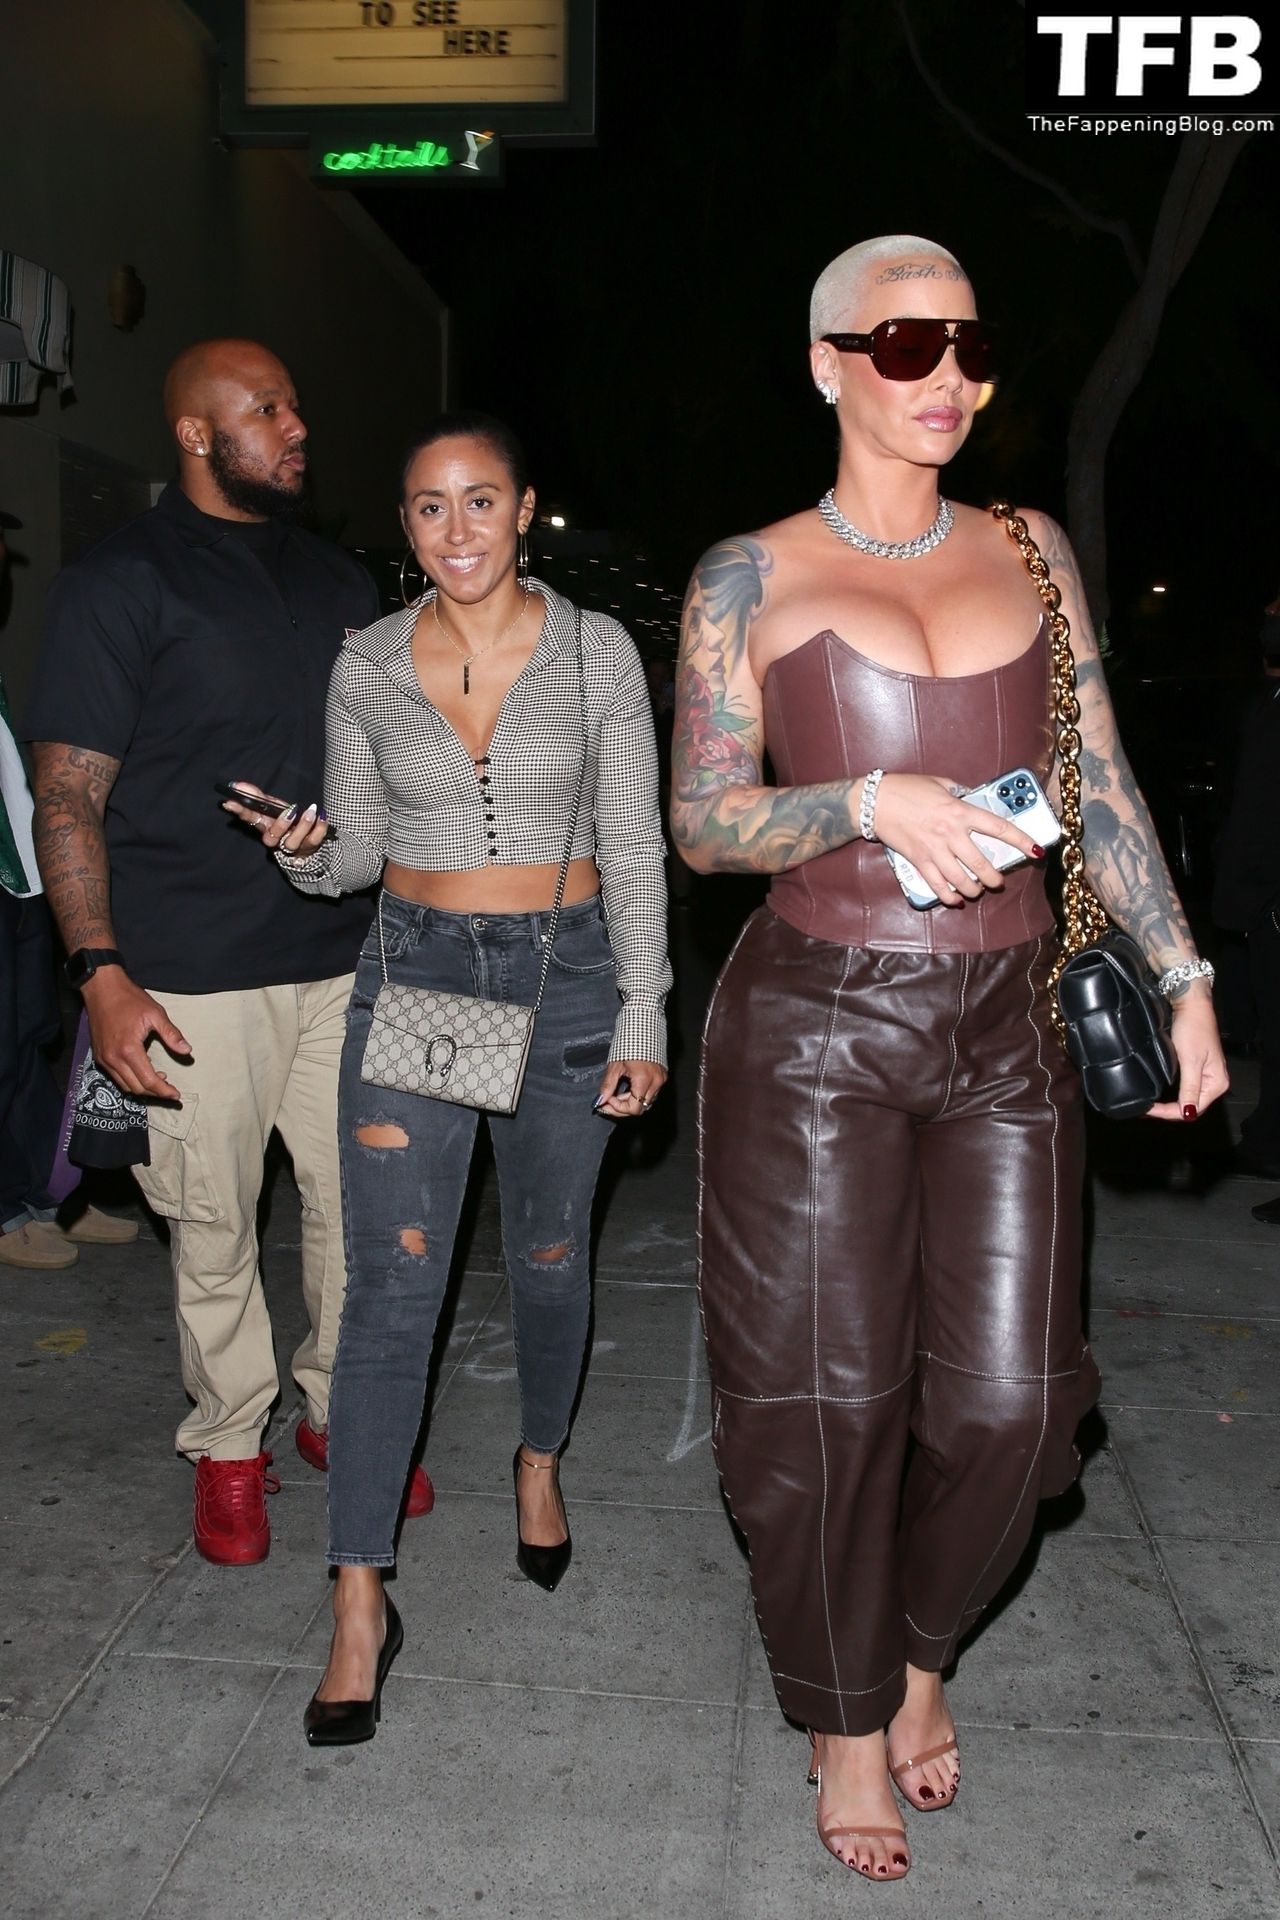 Amber-Rose-Sexy-The-Fappening-Blog-88.jpg